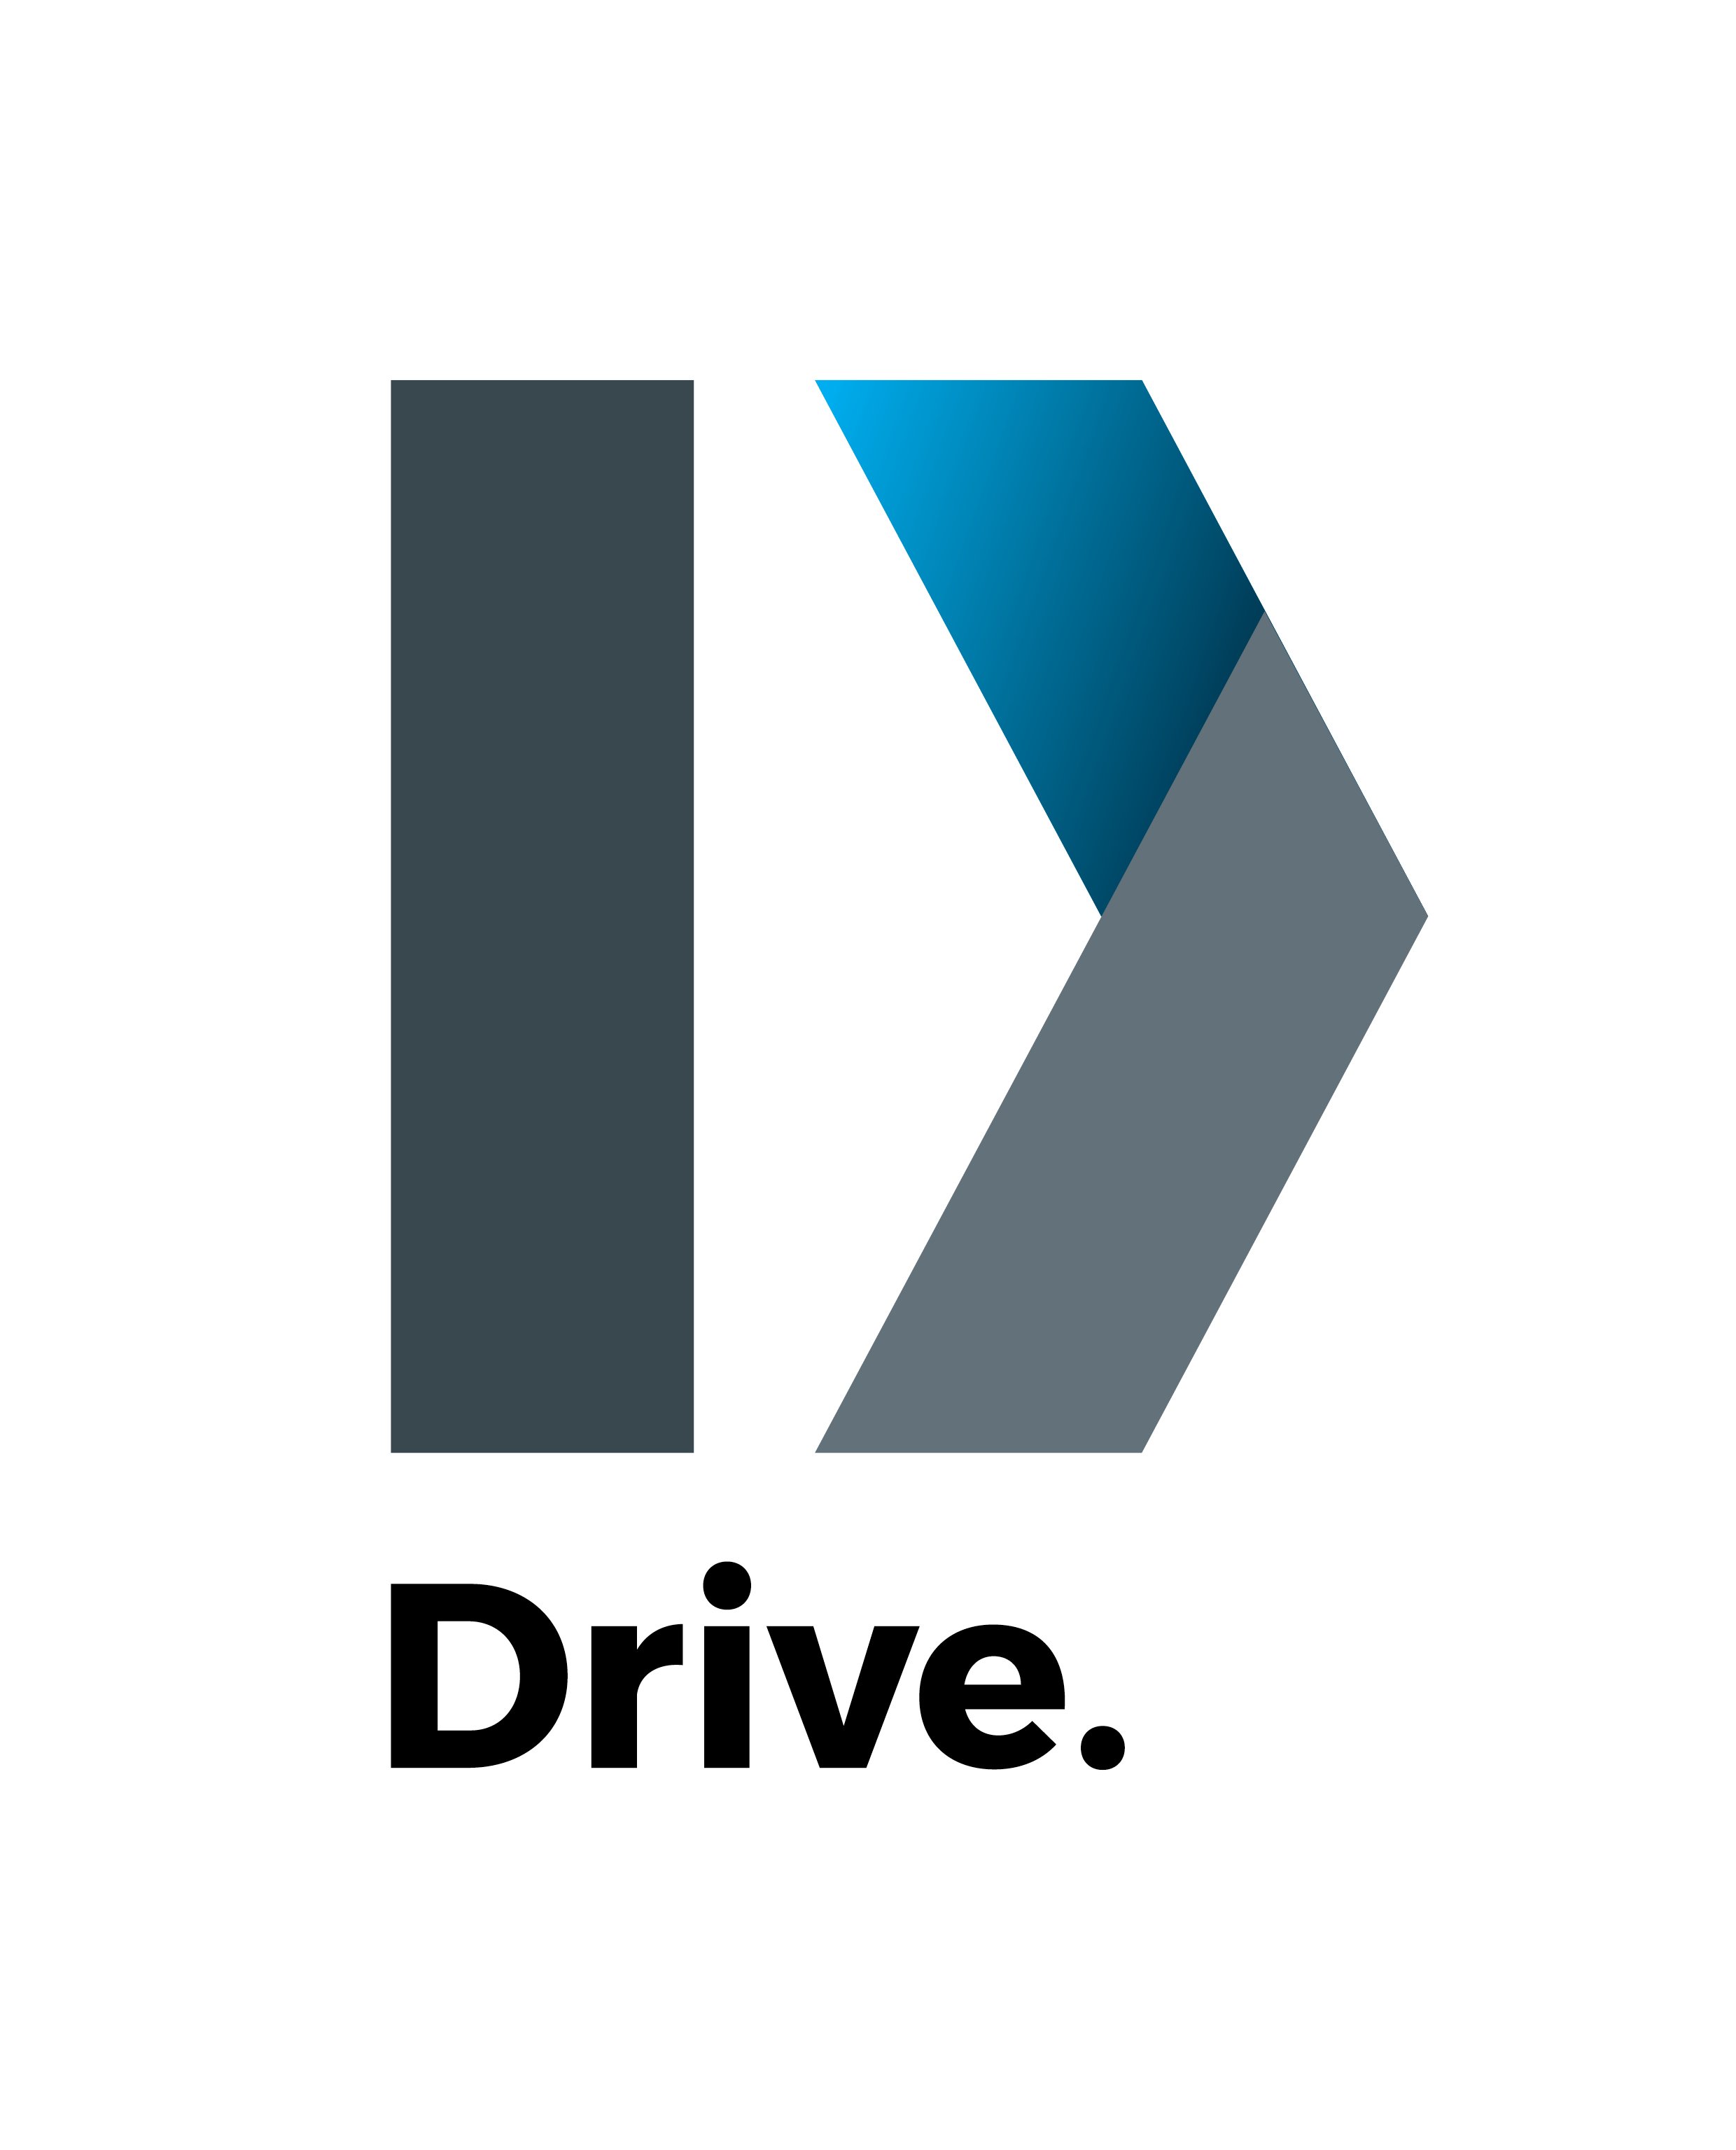 Drive Project Management Logo On White.jpg